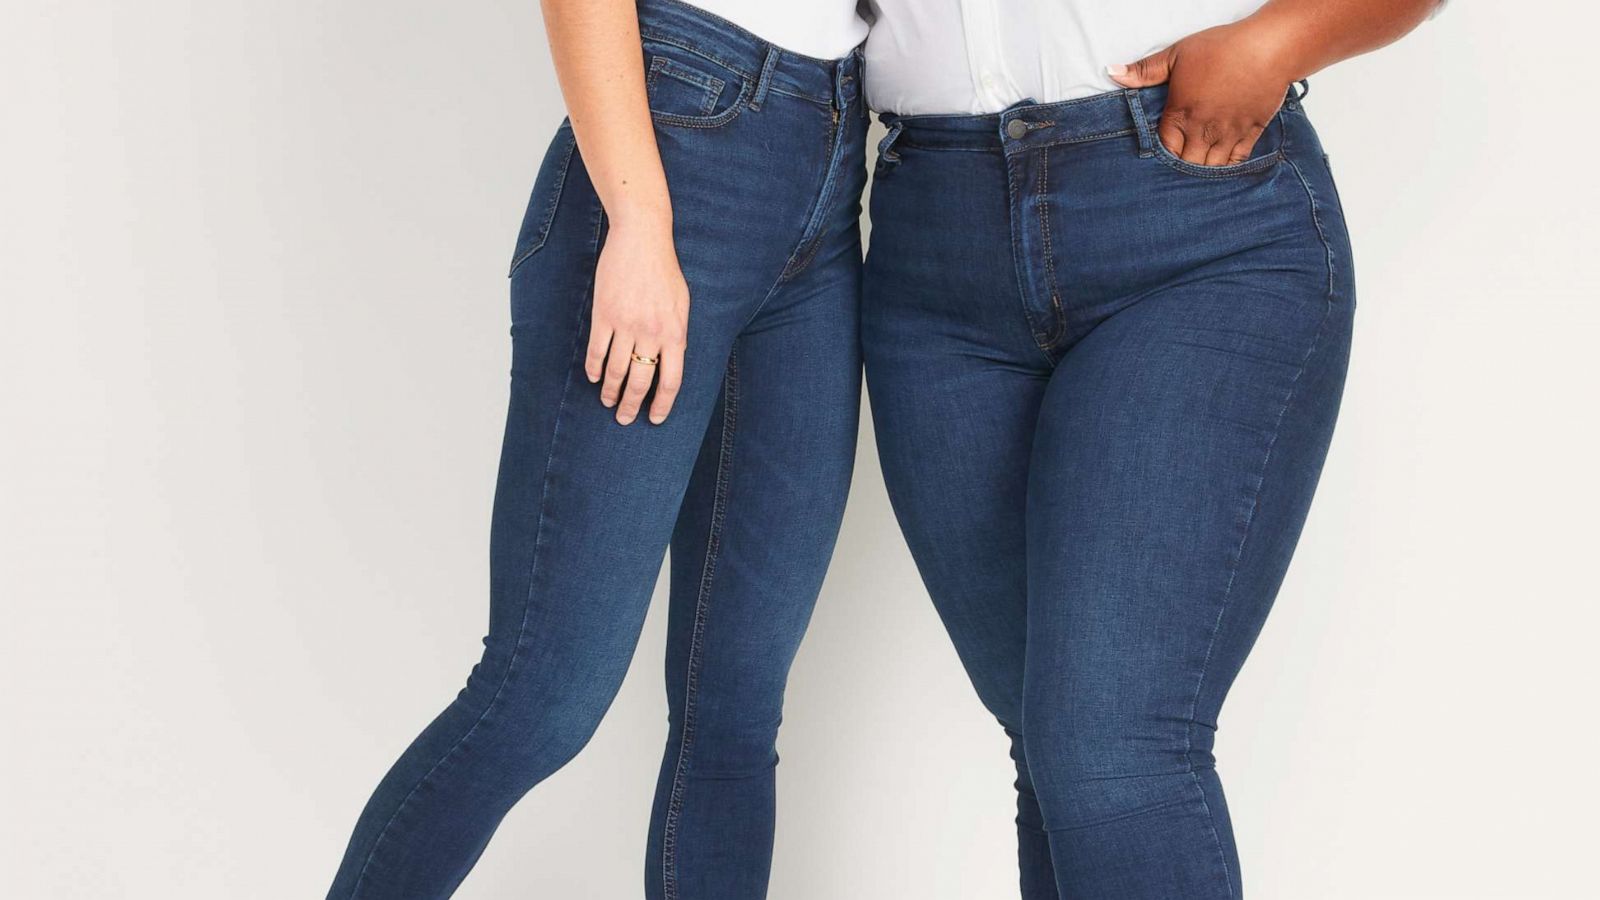 Old Navy High Rise Flare Jeans Blue Size 14 - $27 (40% Off Retail